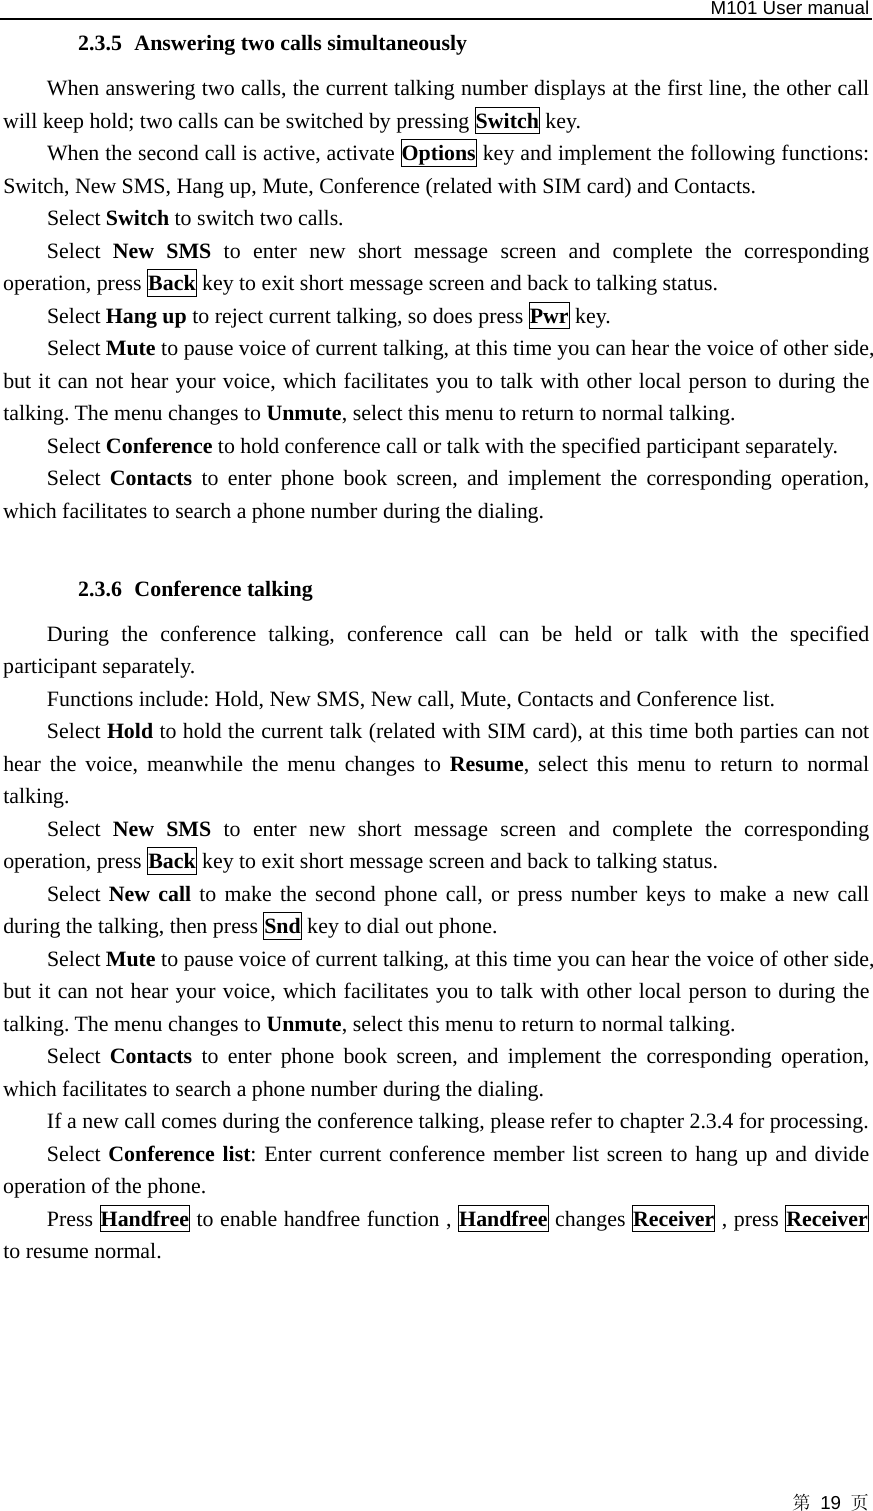   M101 User manual 第 19 页 2.3.5 Answering two calls simultaneously When answering two calls, the current talking number displays at the first line, the other call will keep hold; two calls can be switched by pressing Switch key.   When the second call is active, activate Options key and implement the following functions: Switch, New SMS, Hang up, Mute, Conference (related with SIM card) and Contacts.   Select Switch to switch two calls.   Select New SMS to enter new short message screen and complete the corresponding operation, press Back key to exit short message screen and back to talking status. Select Hang up to reject current talking, so does press Pwr key. Select Mute to pause voice of current talking, at this time you can hear the voice of other side, but it can not hear your voice, which facilitates you to talk with other local person to during the talking. The menu changes to Unmute, select this menu to return to normal talking.   Select Conference to hold conference call or talk with the specified participant separately. Select  Contacts to enter phone book screen, and implement the corresponding operation, which facilitates to search a phone number during the dialing.  2.3.6 Conference talking During the conference talking, conference call can be held or talk with the specified participant separately. Functions include: Hold, New SMS, New call, Mute, Contacts and Conference list.   Select Hold to hold the current talk (related with SIM card), at this time both parties can not hear the voice, meanwhile the menu changes to Resume, select this menu to return to normal talking. Select  New SMS to enter new short message screen and complete the corresponding    operation, press Back key to exit short message screen and back to talking status. Select New call to make the second phone call, or press number keys to make a new call during the talking, then press Snd key to dial out phone. Select Mute to pause voice of current talking, at this time you can hear the voice of other side, but it can not hear your voice, which facilitates you to talk with other local person to during the talking. The menu changes to Unmute, select this menu to return to normal talking.   Select  Contacts to enter phone book screen, and implement the corresponding operation, which facilitates to search a phone number during the dialing. If a new call comes during the conference talking, please refer to chapter 2.3.4 for processing. Select Conference list: Enter current conference member list screen to hang up and divide operation of the phone. Press Handfree to enable handfree function , Handfree changes Receiver , press Receiver to resume normal.       